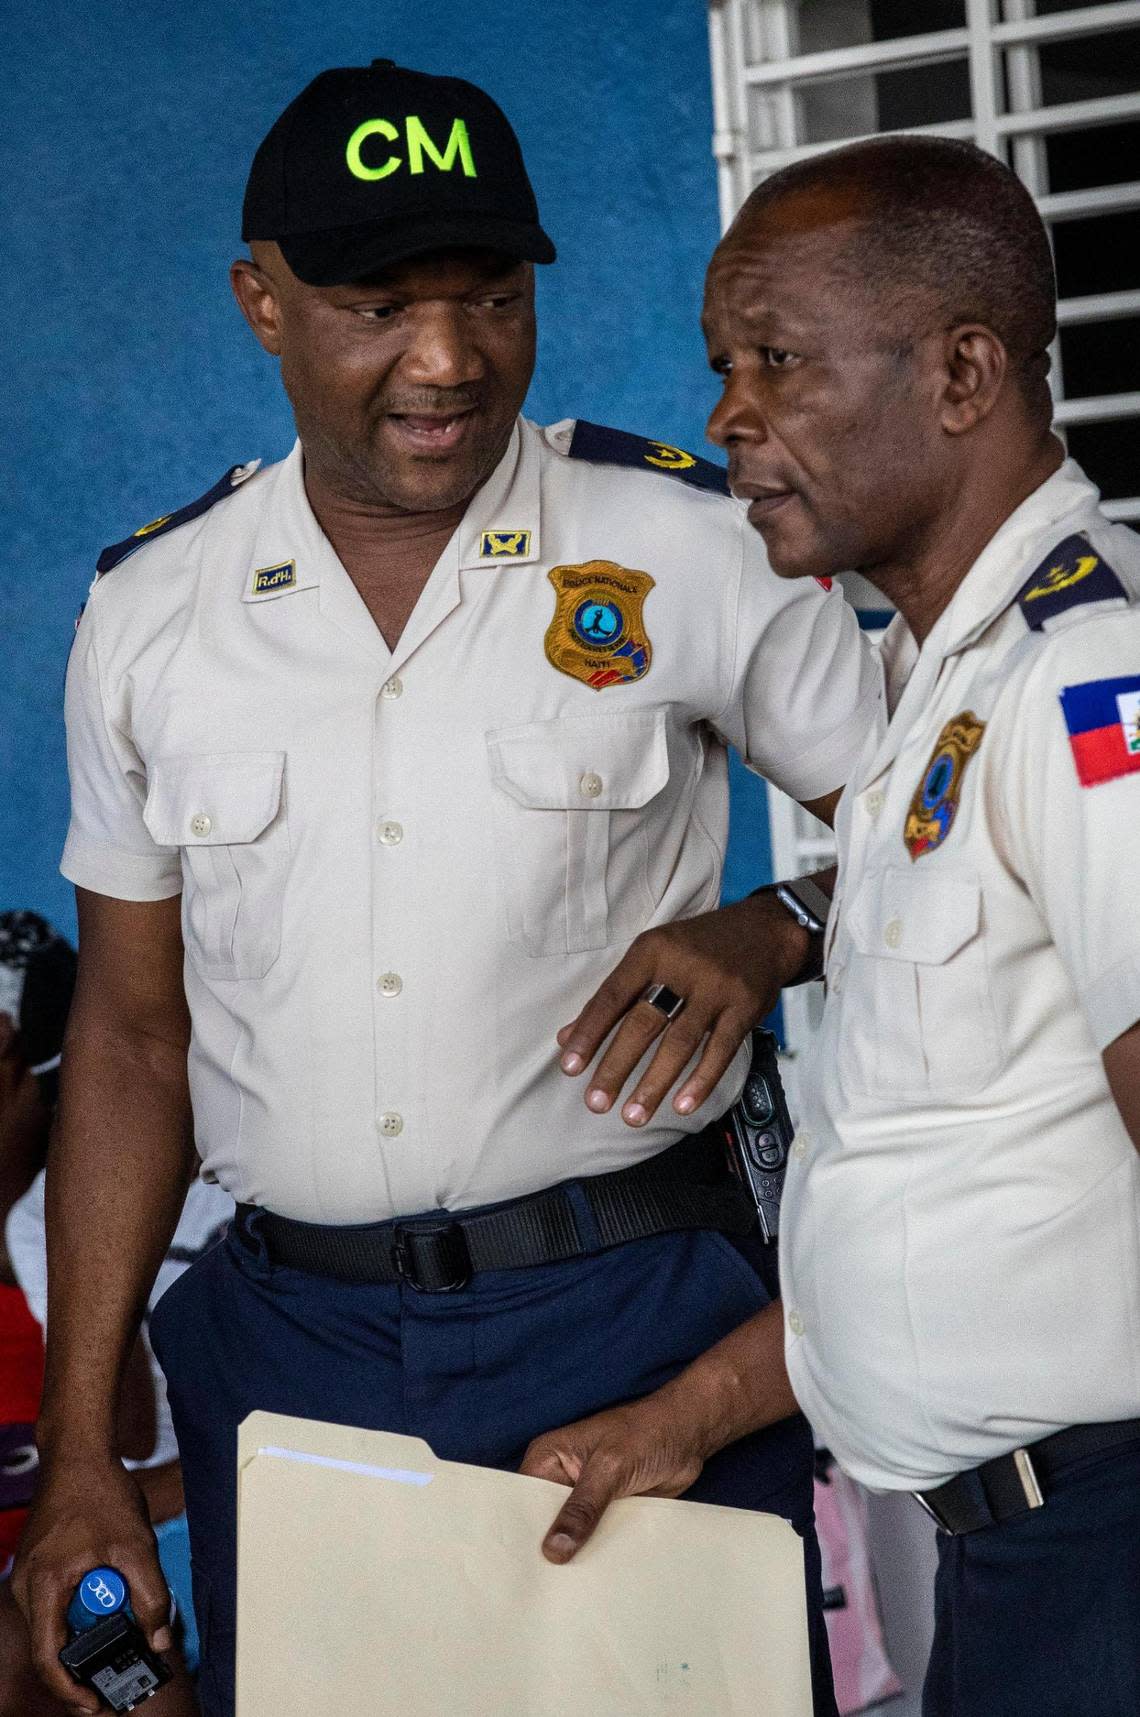 Haiti National Police Commissioner Livenston Gauthier, left, who is in charge of the Tabarre District, speaks to Principal Commissioner of Police Roger Lamartinière, who is responsible for Croix-des-Bouquets. Both have been working together to stave off control of the region by gangs.